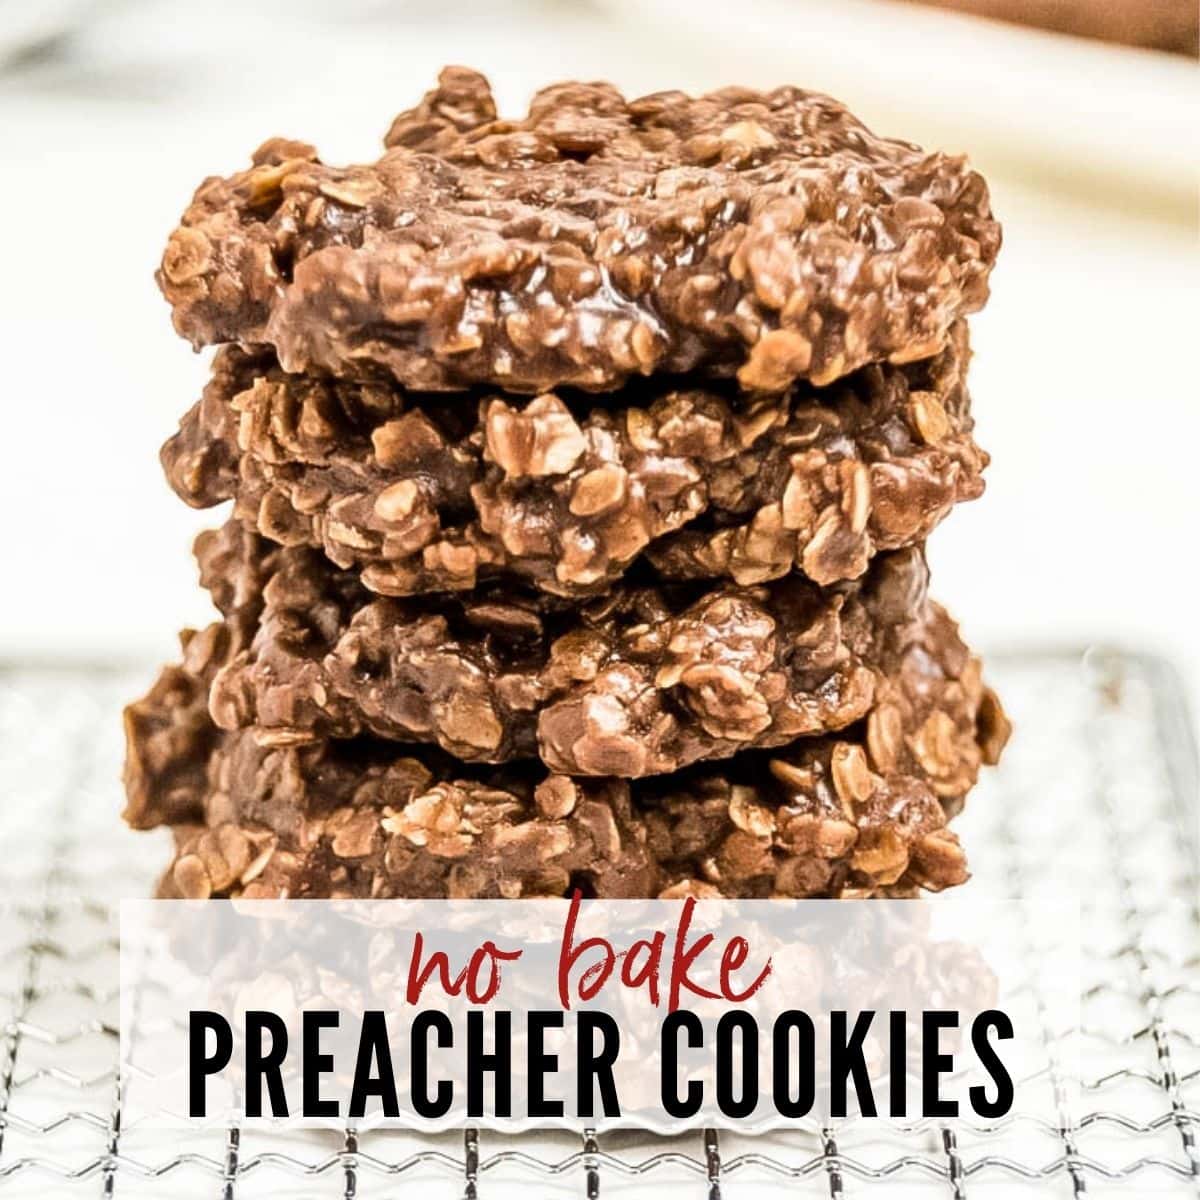 Stack of No Bake Preacher Cookies with text overlay